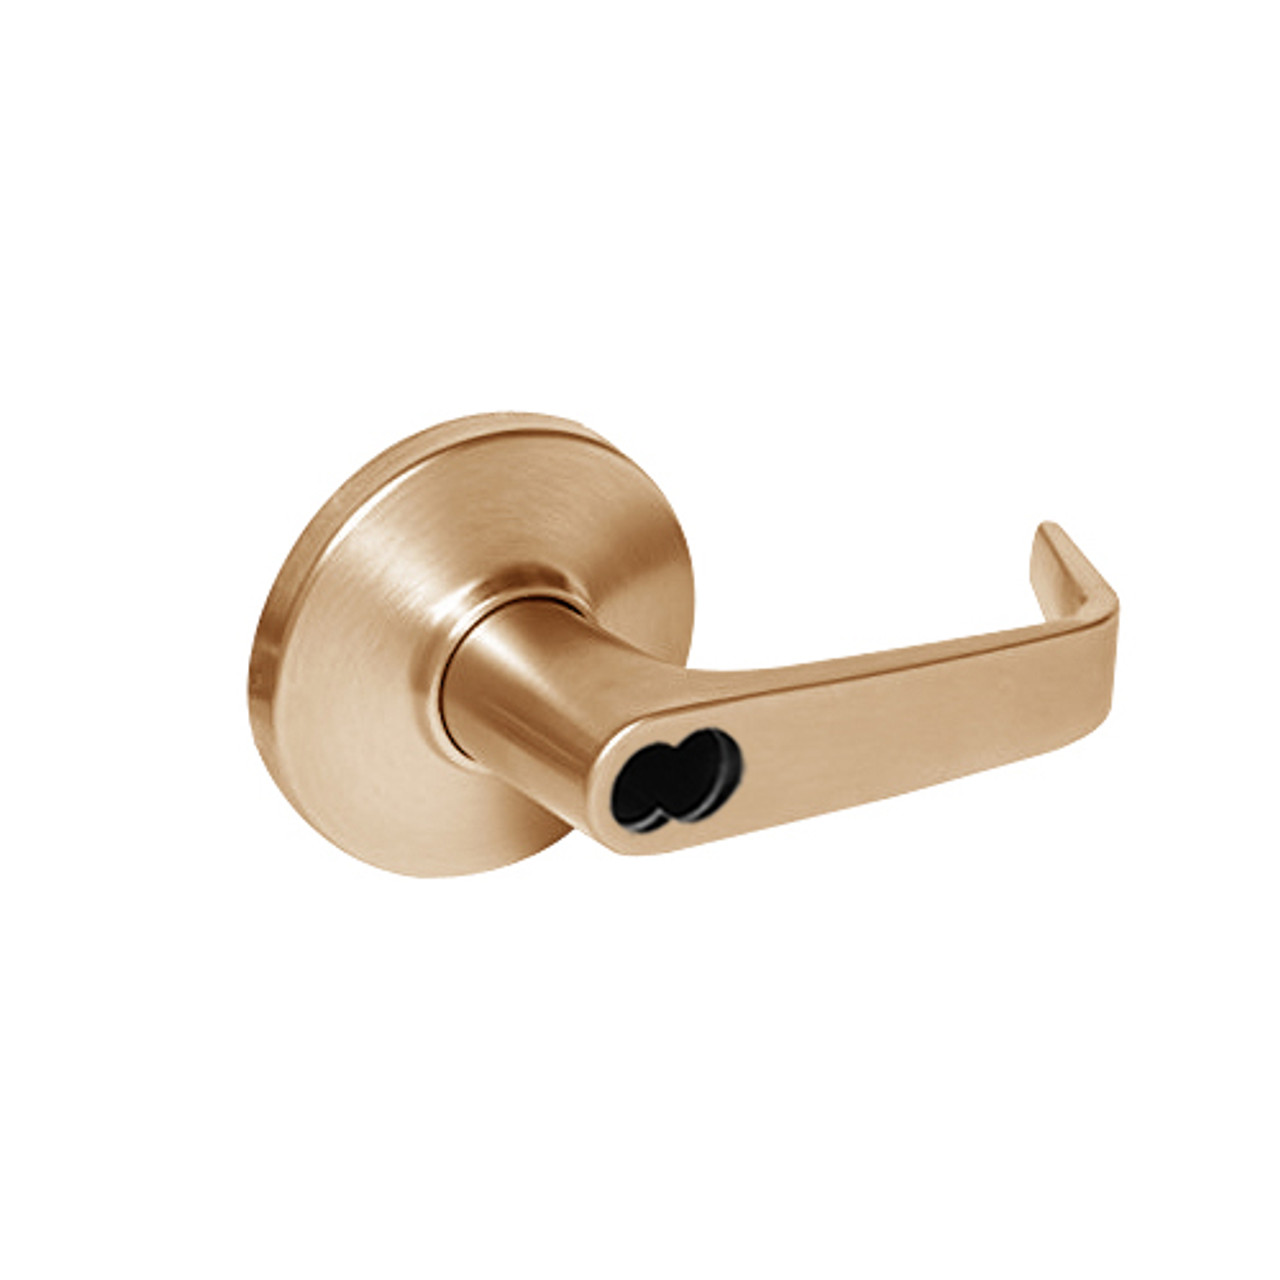 9K37XD15DSTK612 Best 9K Series Special Function Cylindrical Lever Locks with Contour Angle with Return Lever Design Accept 7 Pin Best Core in Satin Bronze